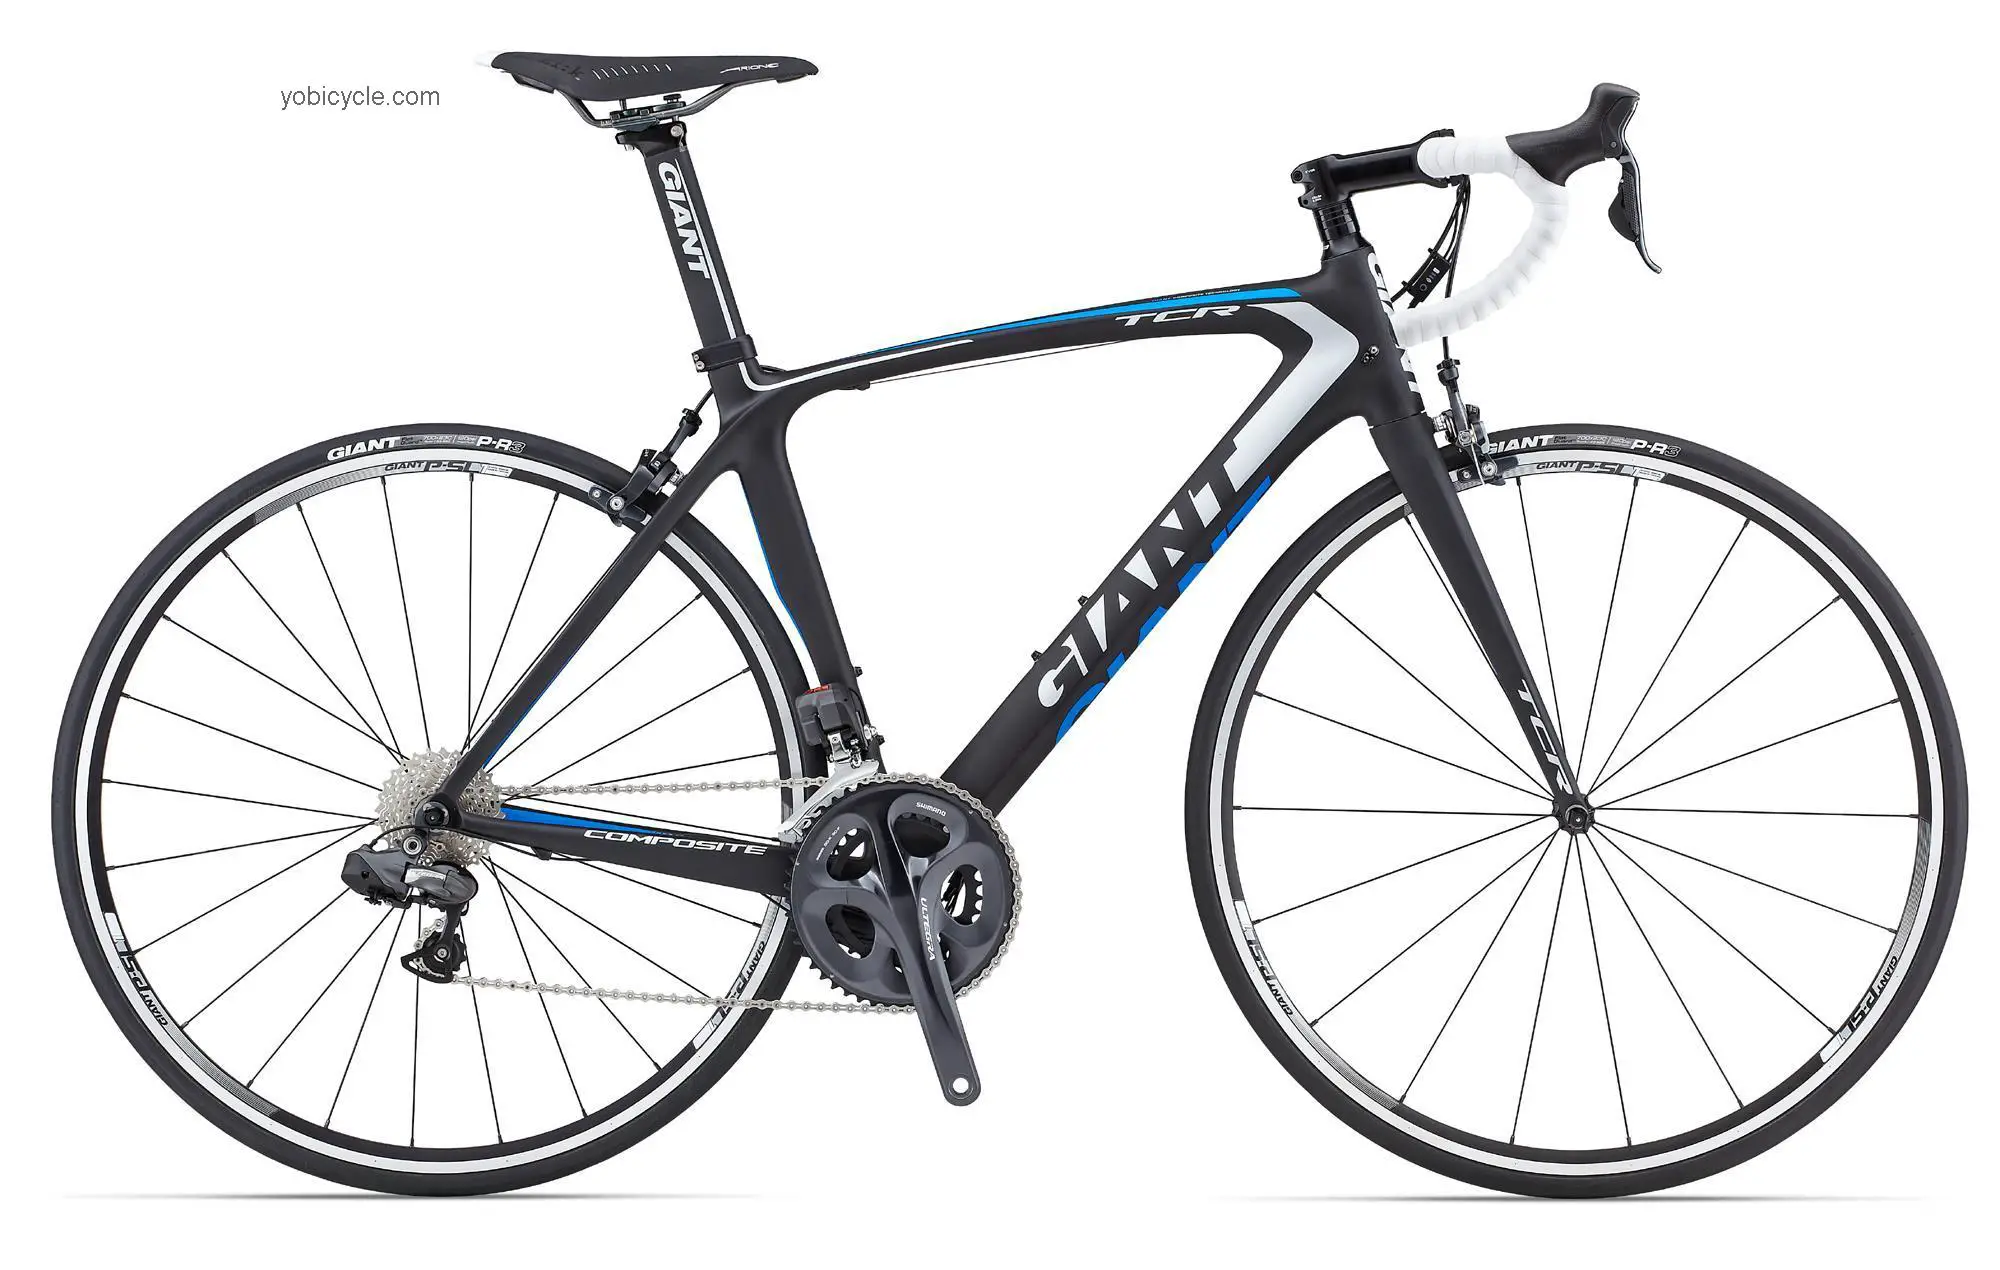 Giant TCR Composite 0 2013 comparison online with competitors